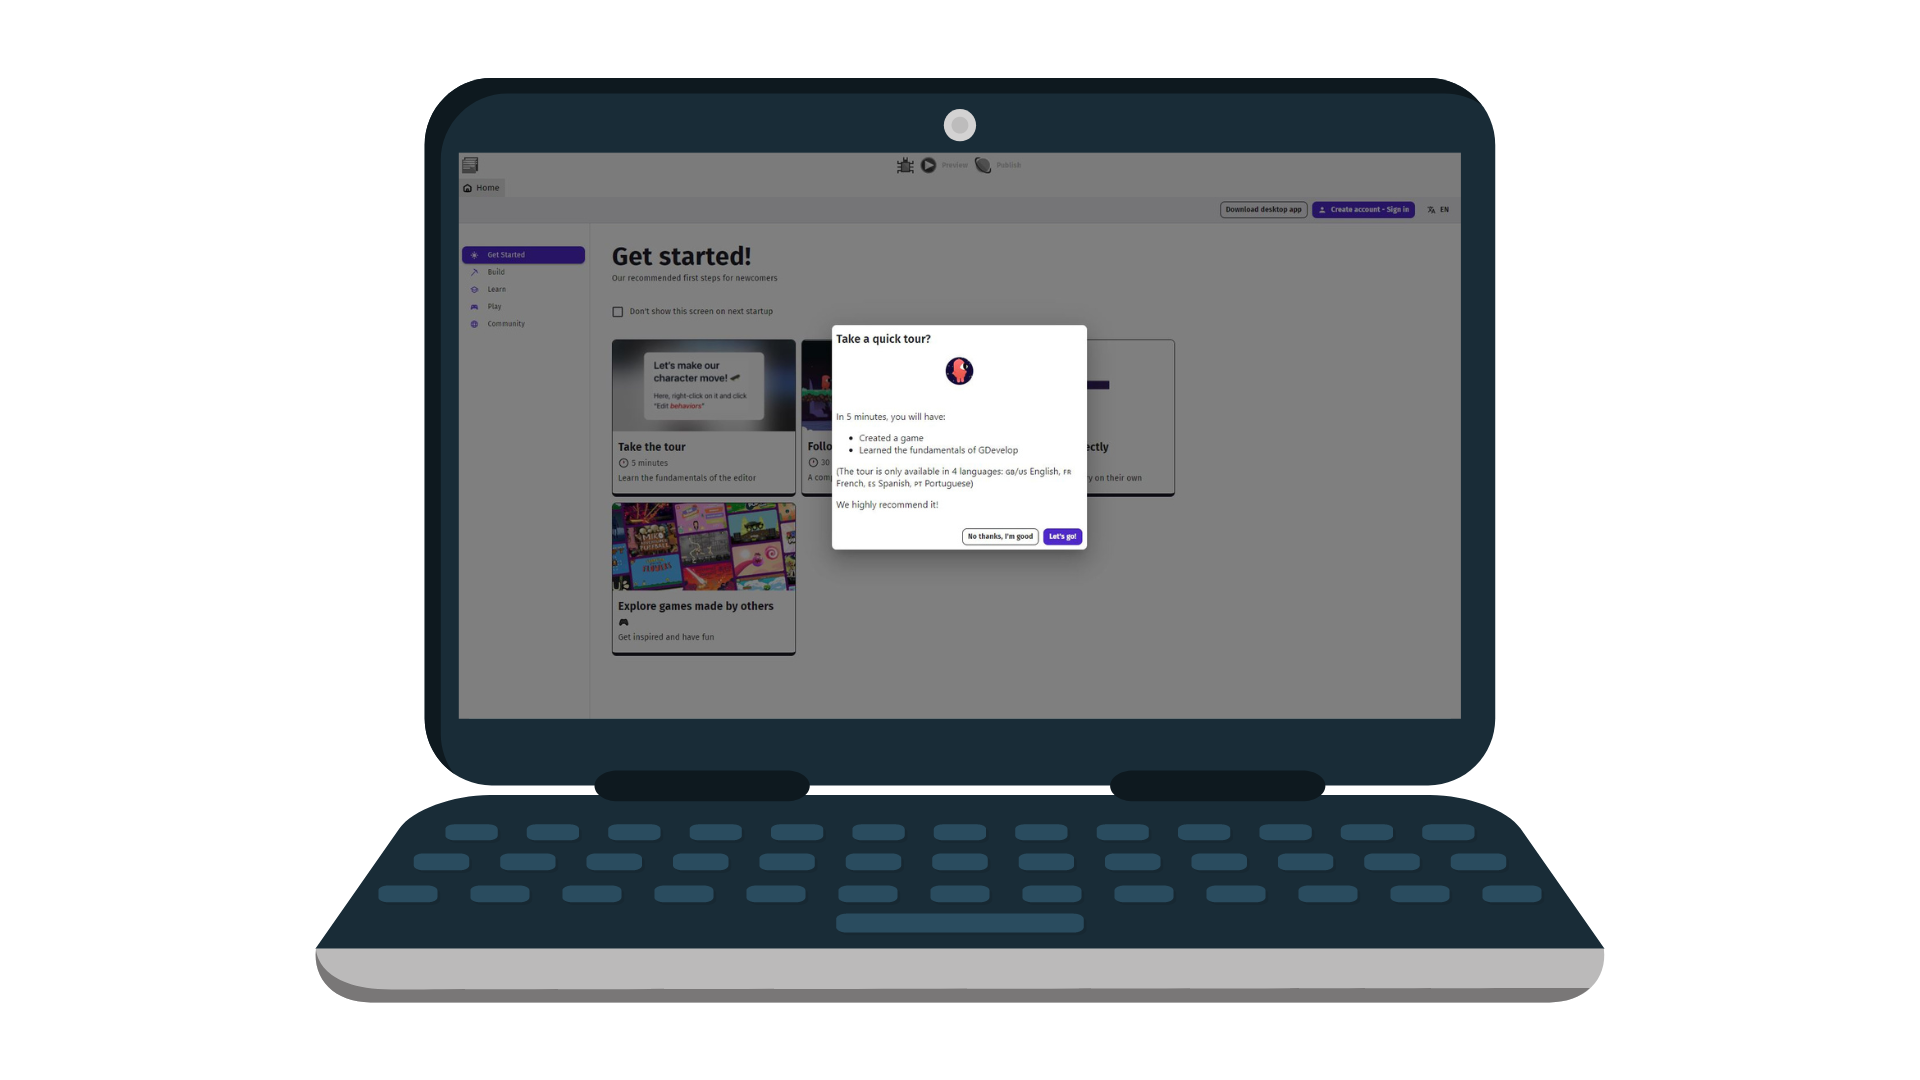 You can easily get started with the GDevelop web editor. 